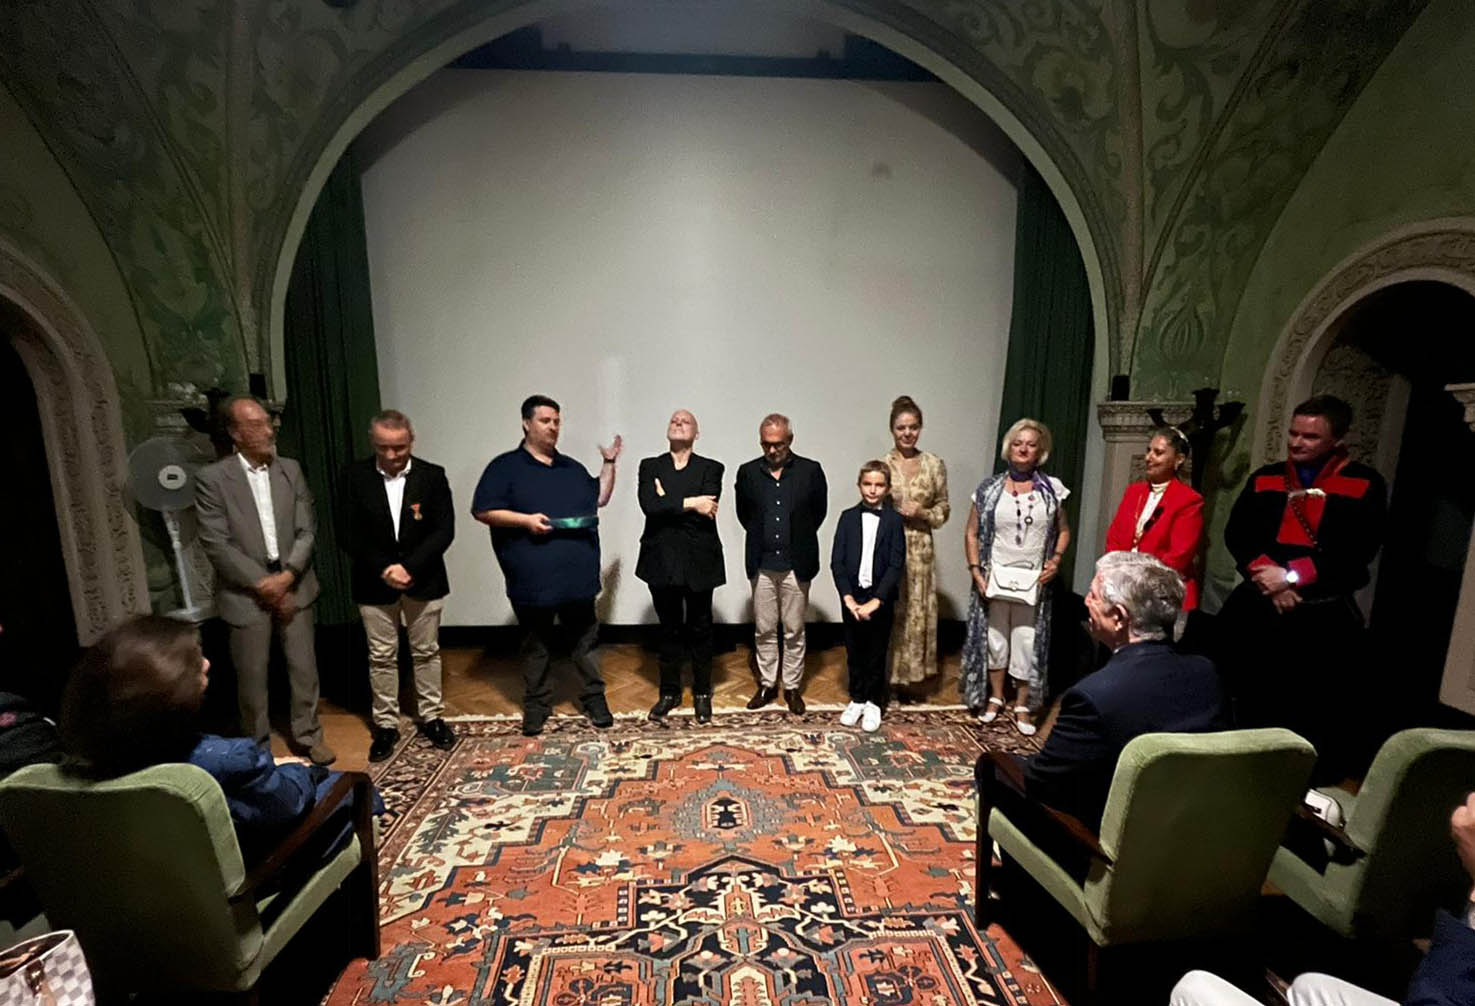 PREMIERE OF DOCUMENTARY “DEATH CAMP IN KARASJOK, NORWAY” AT THE ROYAL PALACE